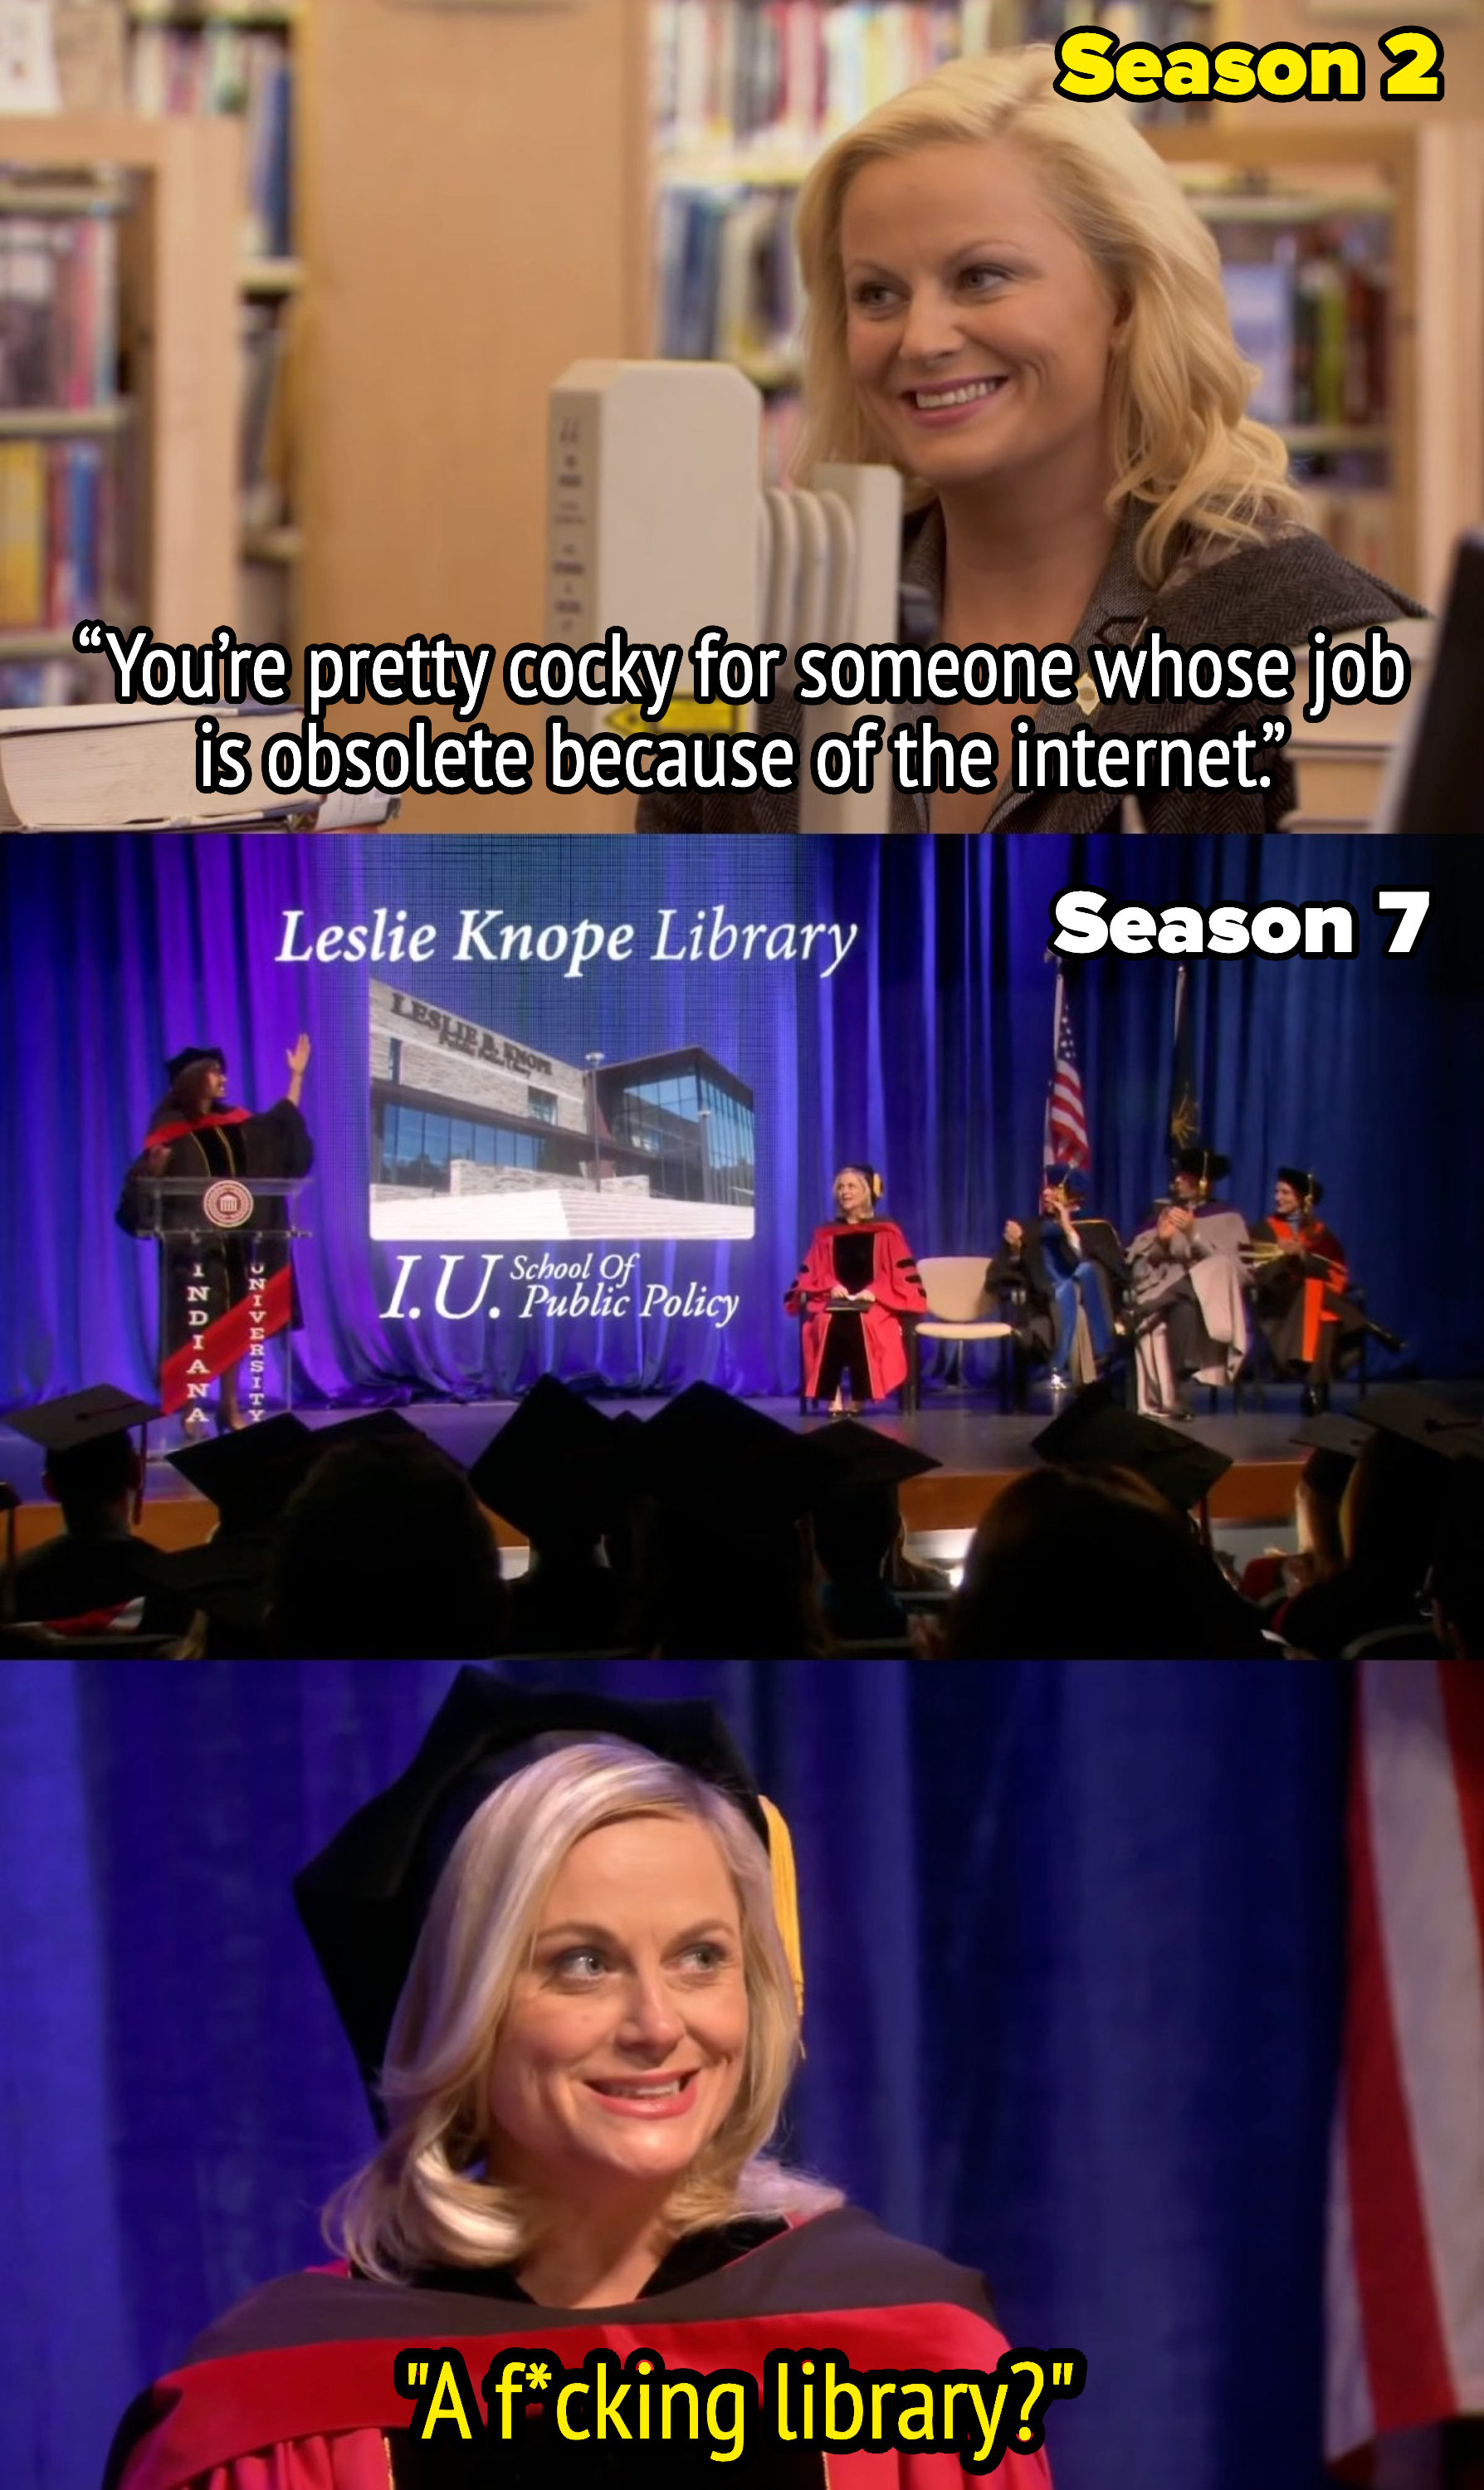 leslie knope telling a librarian you&#x27;re pretty cocky for someone whose job is obsolete because of the internet and later having a library dedicated to her while she mutters a fucking library under her breath